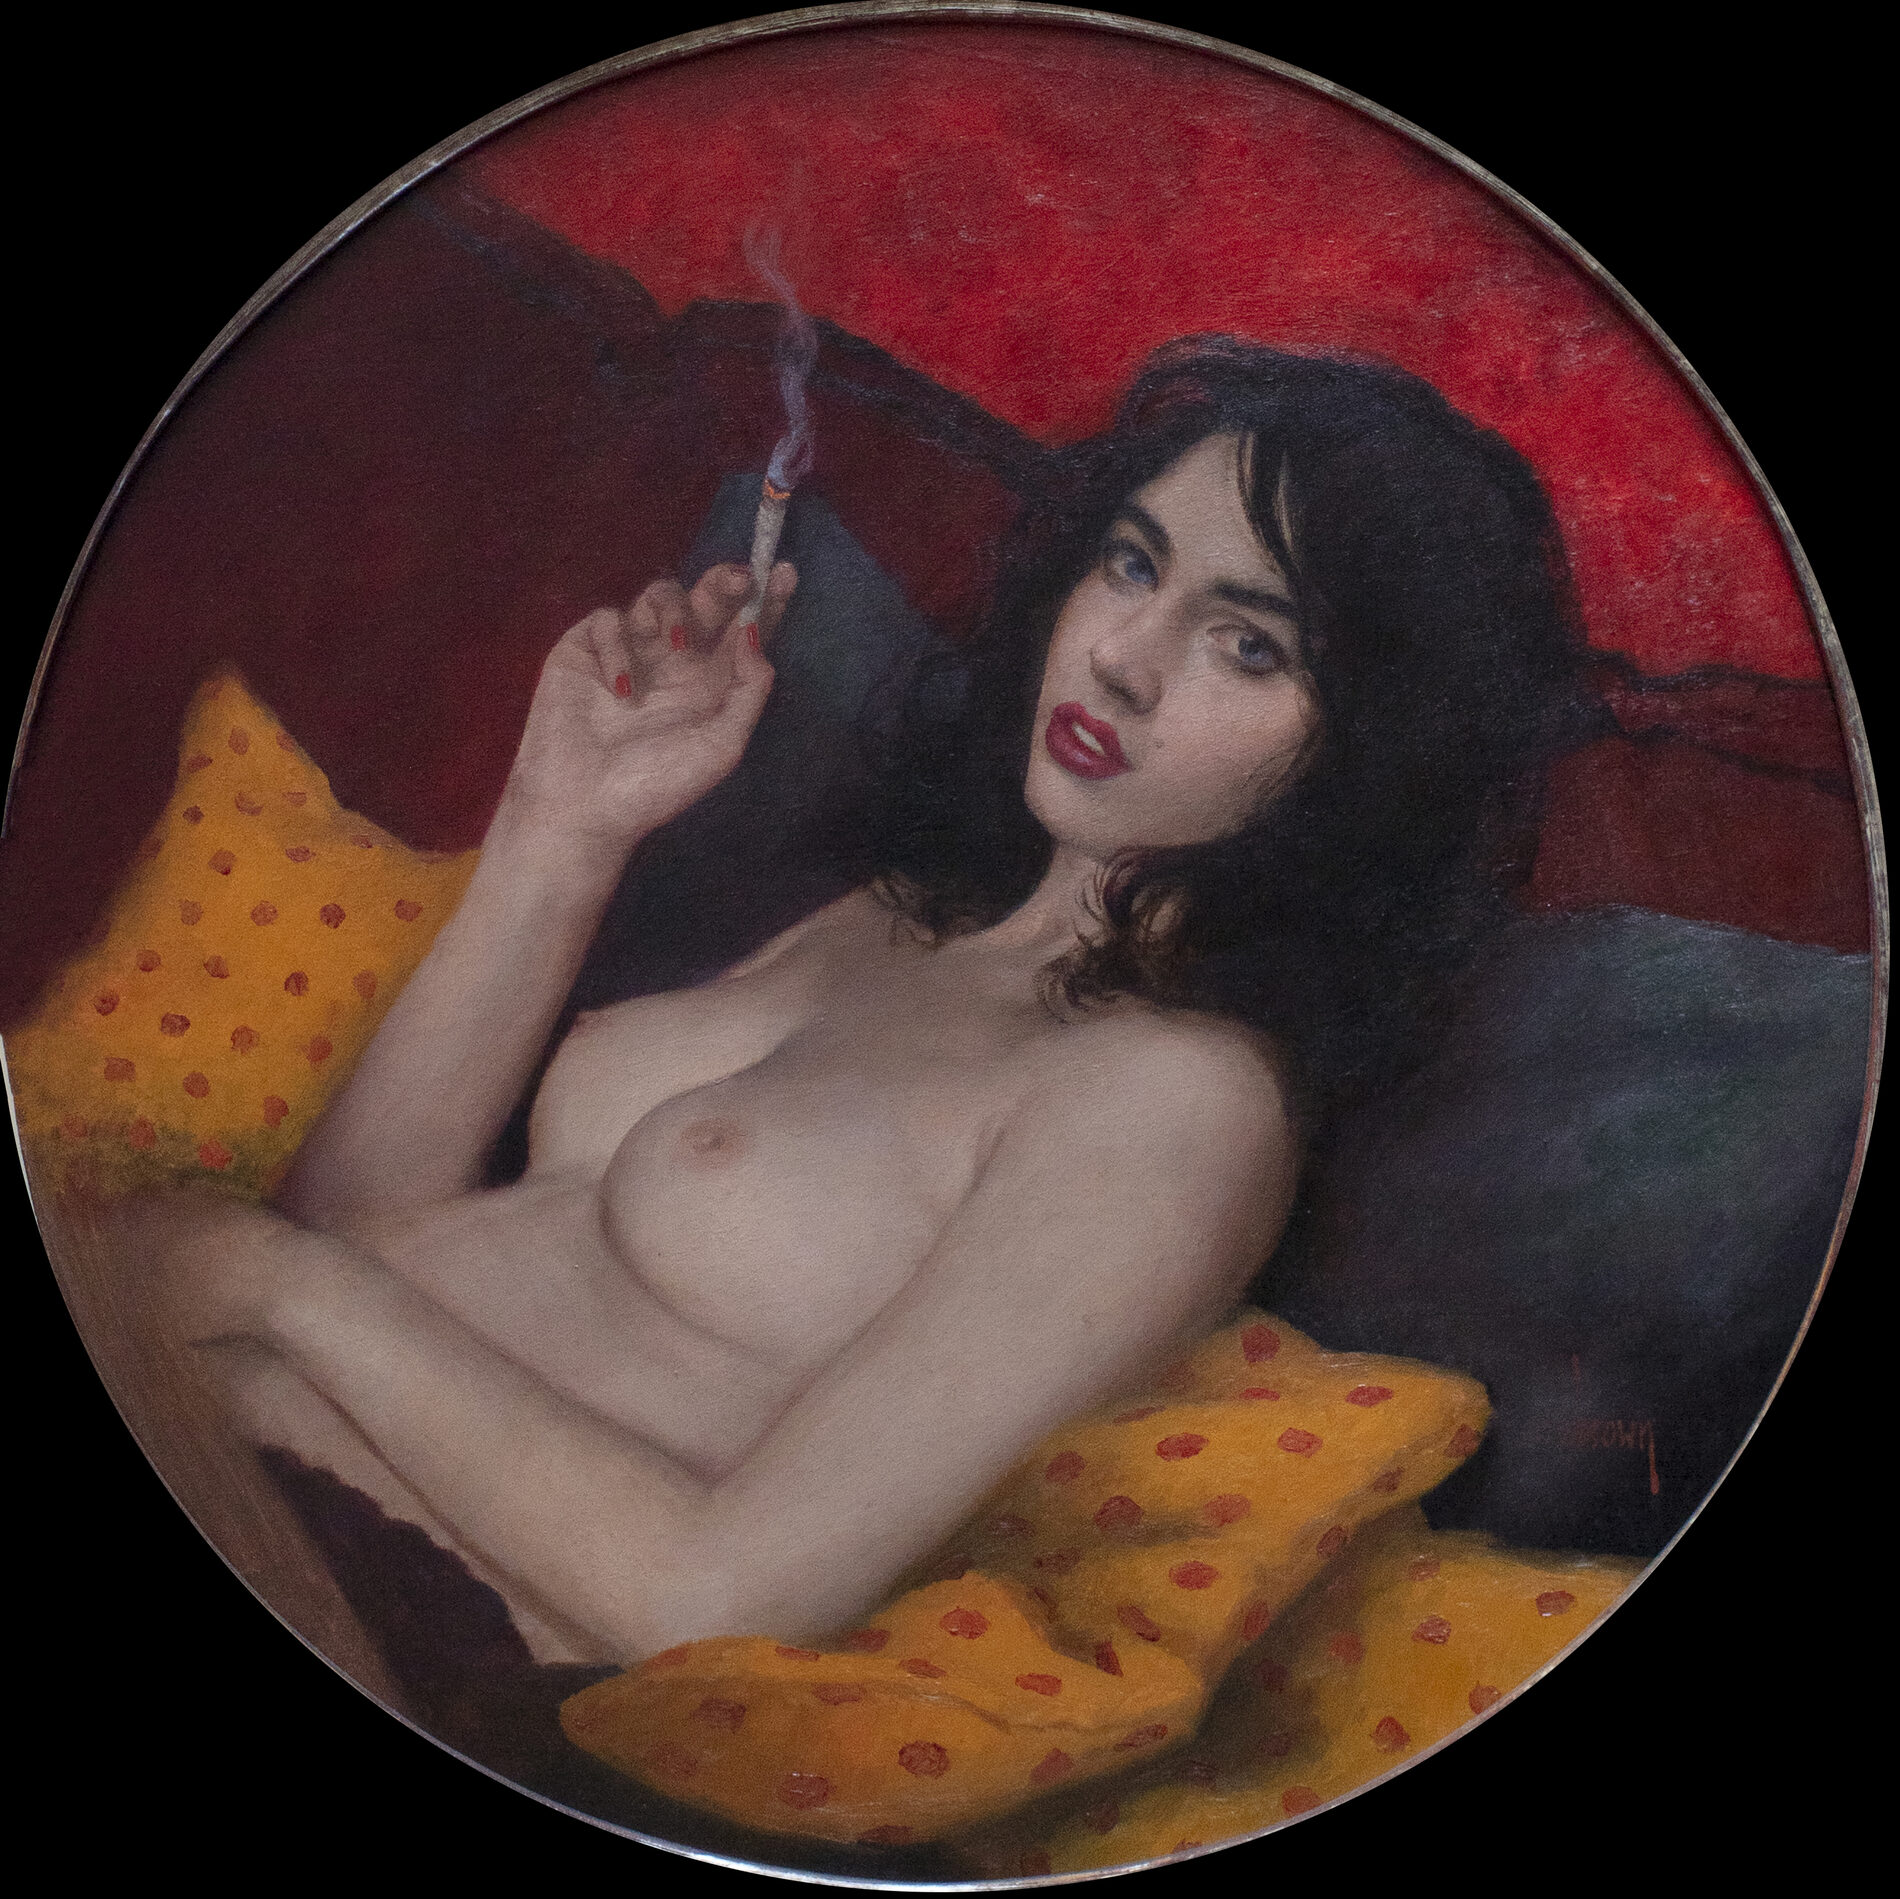 In a circular frame, a shirtless woman issmoking a cigarette while reclining on pilows.